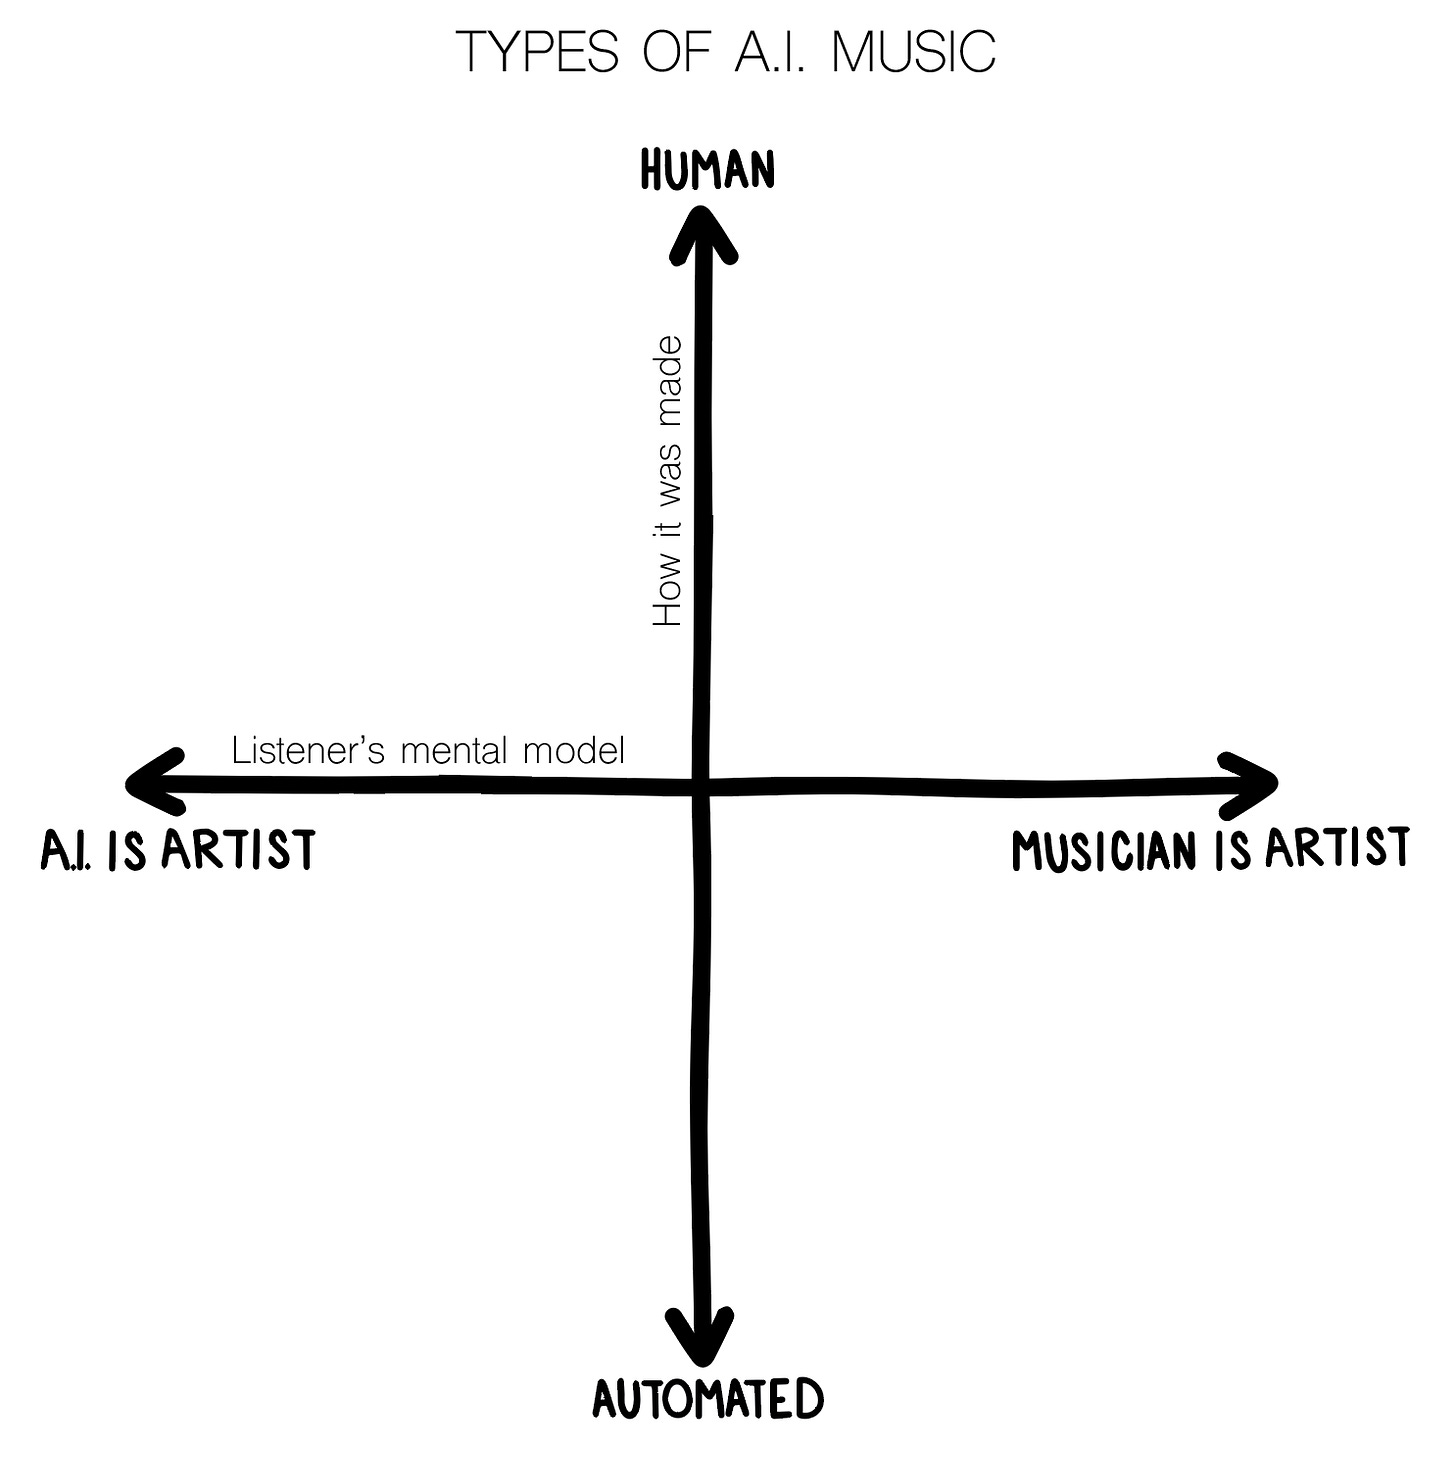 A hand drawn x-y graph. The x-axis is labeled “Listener’s mental model” with “A.I. is artist” on the left and “Musician is artist” on the right. The y-axis is labeled “How it was made” with “Human” at the top and “Automated” at the bottom. 